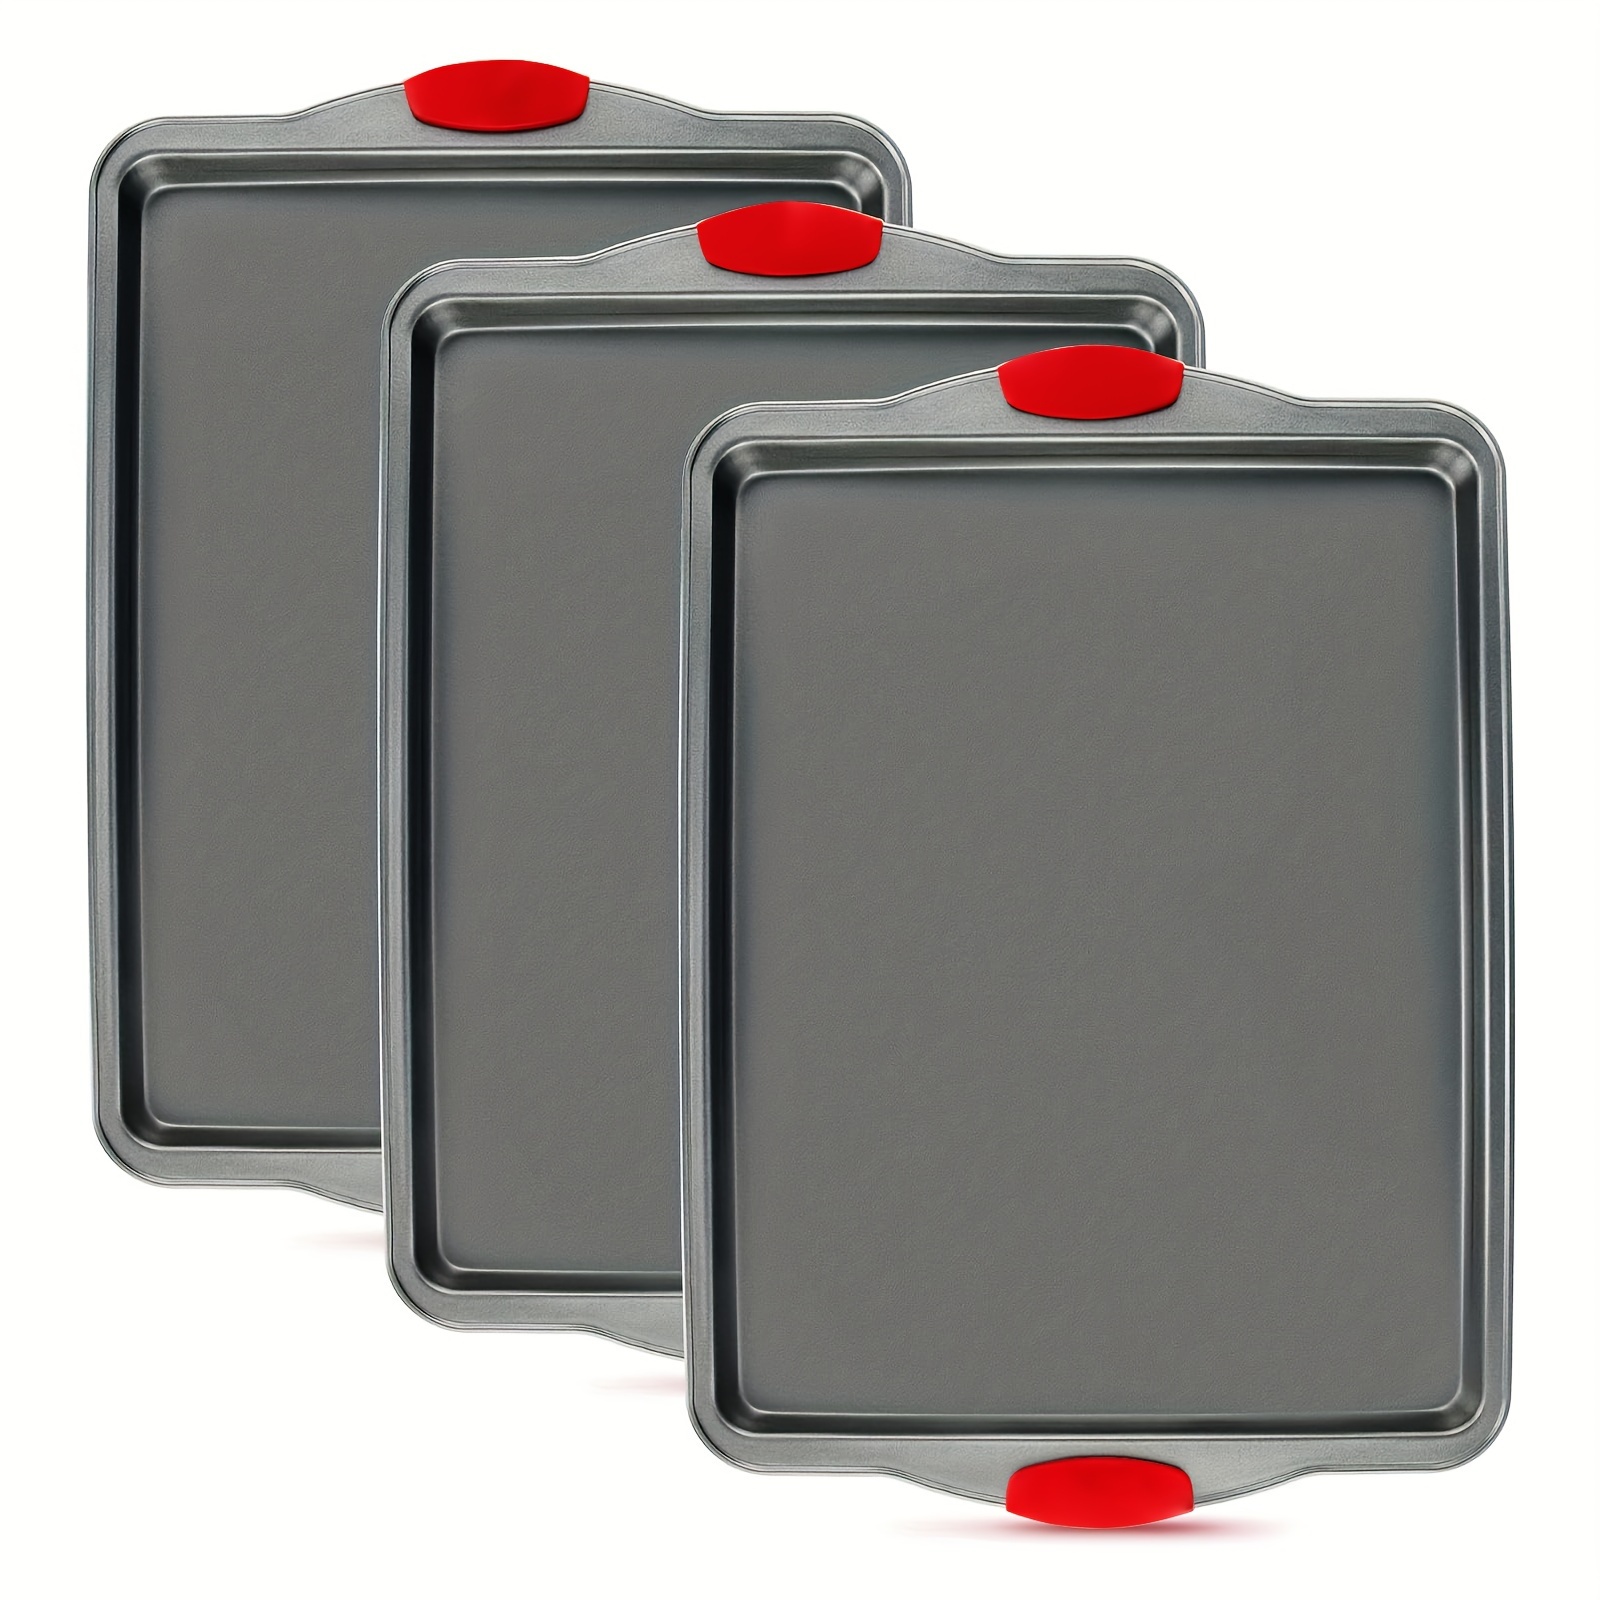 

3pcs, Non Stick Baking Trays - These Cookie Baking Trays Are Non-toxic, Resistant To Dents, Bending, And Rust, Made Of Large-sized Carbon Steel